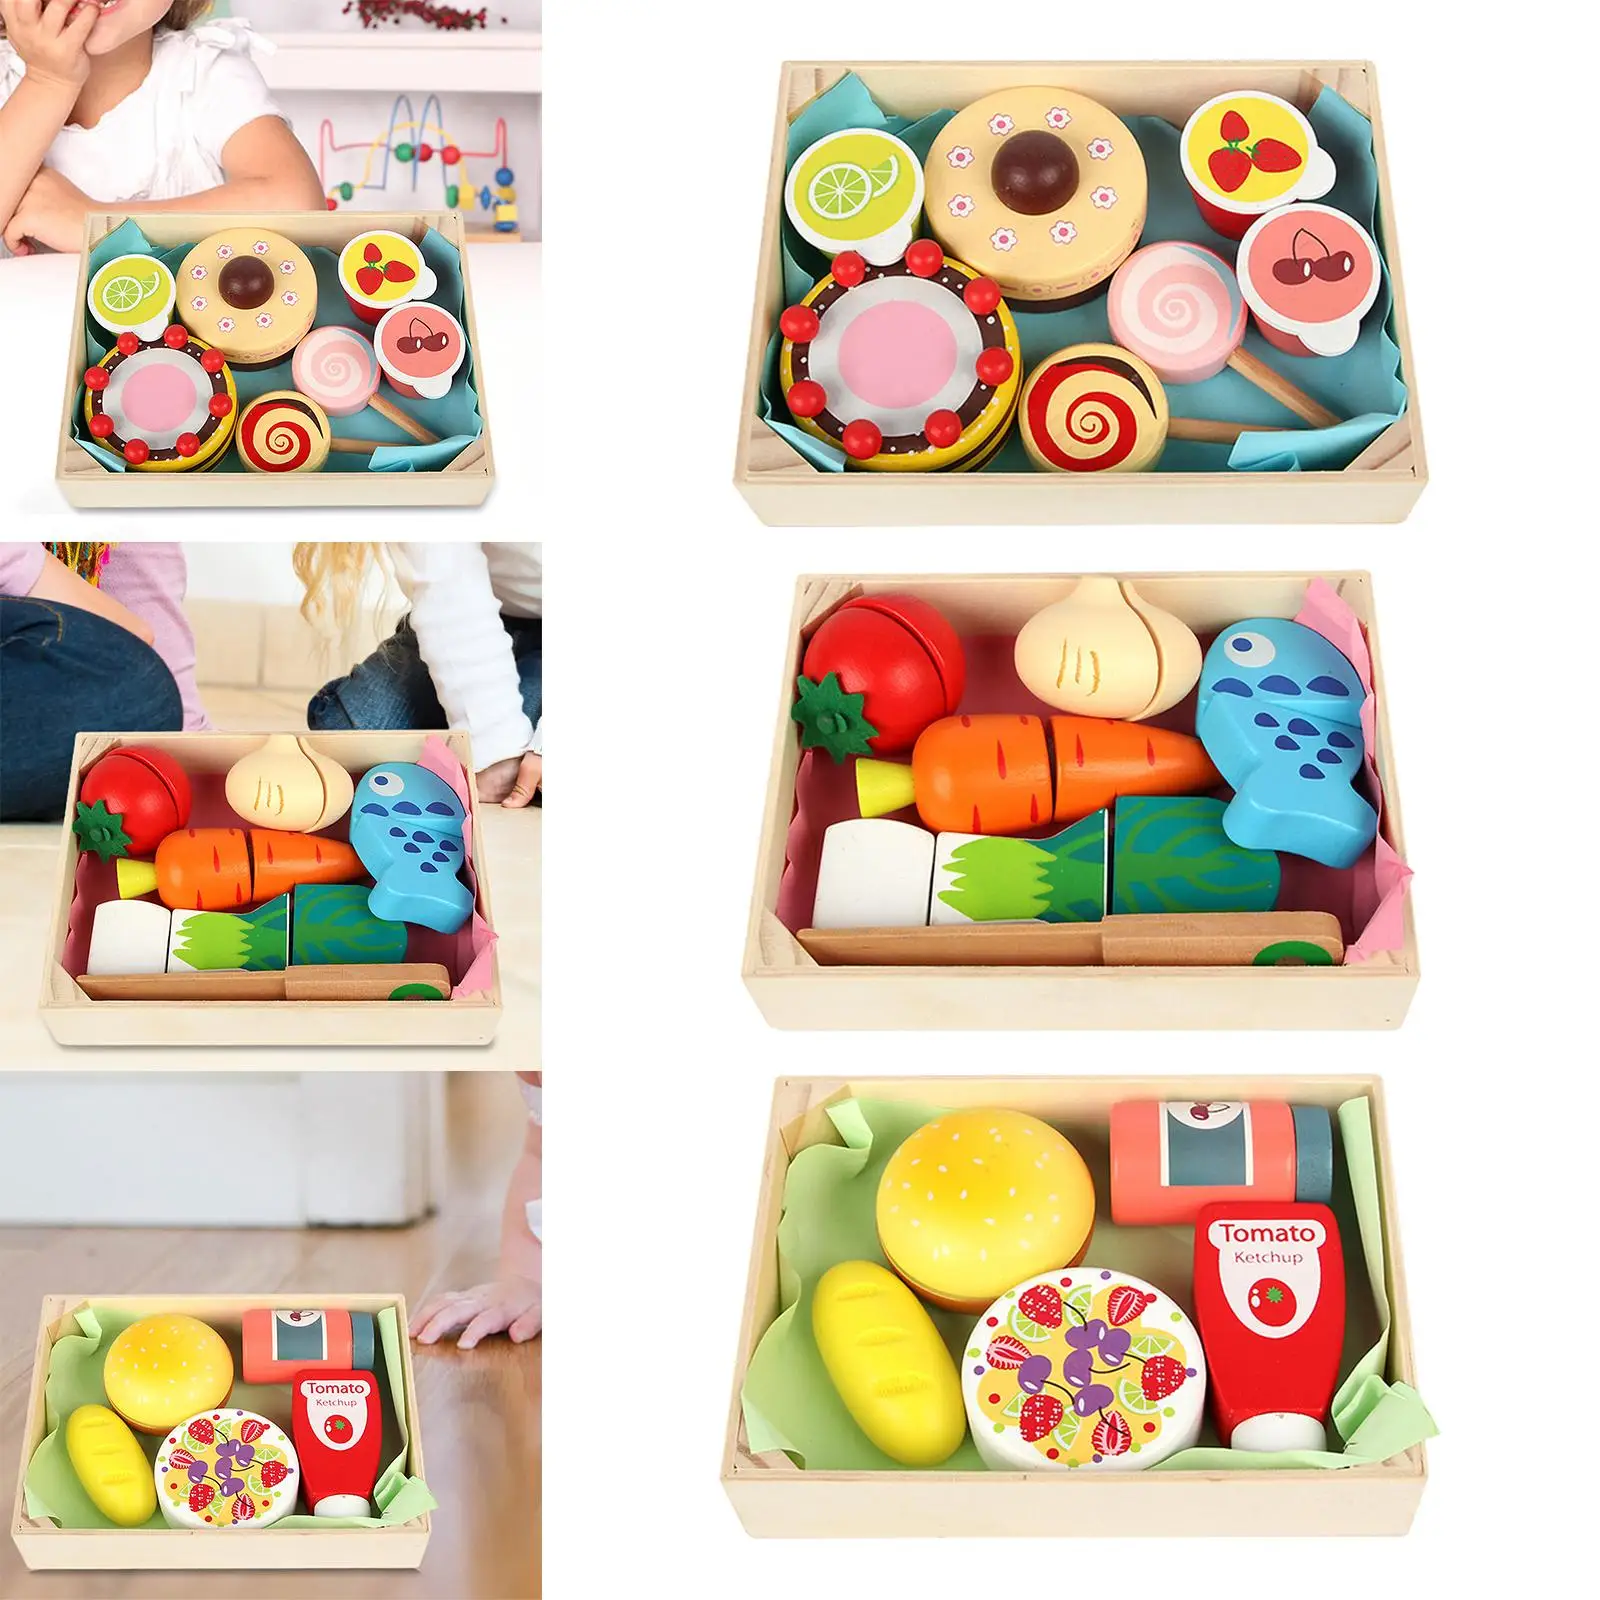 Food Kitchen Toys Kitchen Toys Hands On Ability for Boys Birthday Gifts